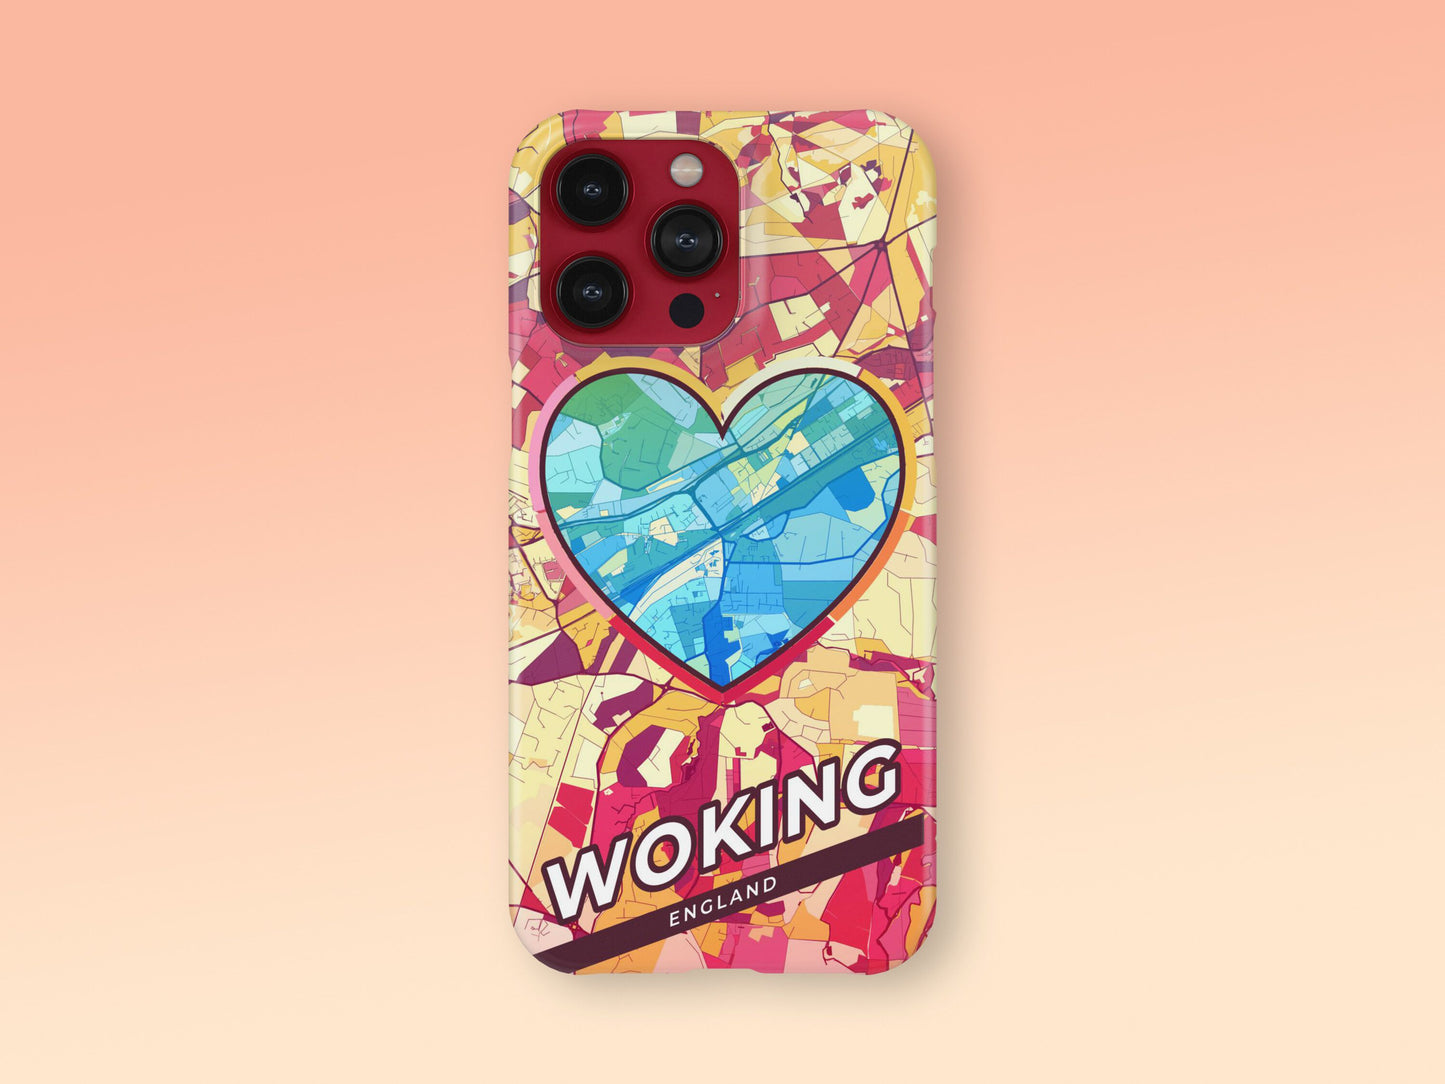 Woking England slim phone case with colorful icon 2